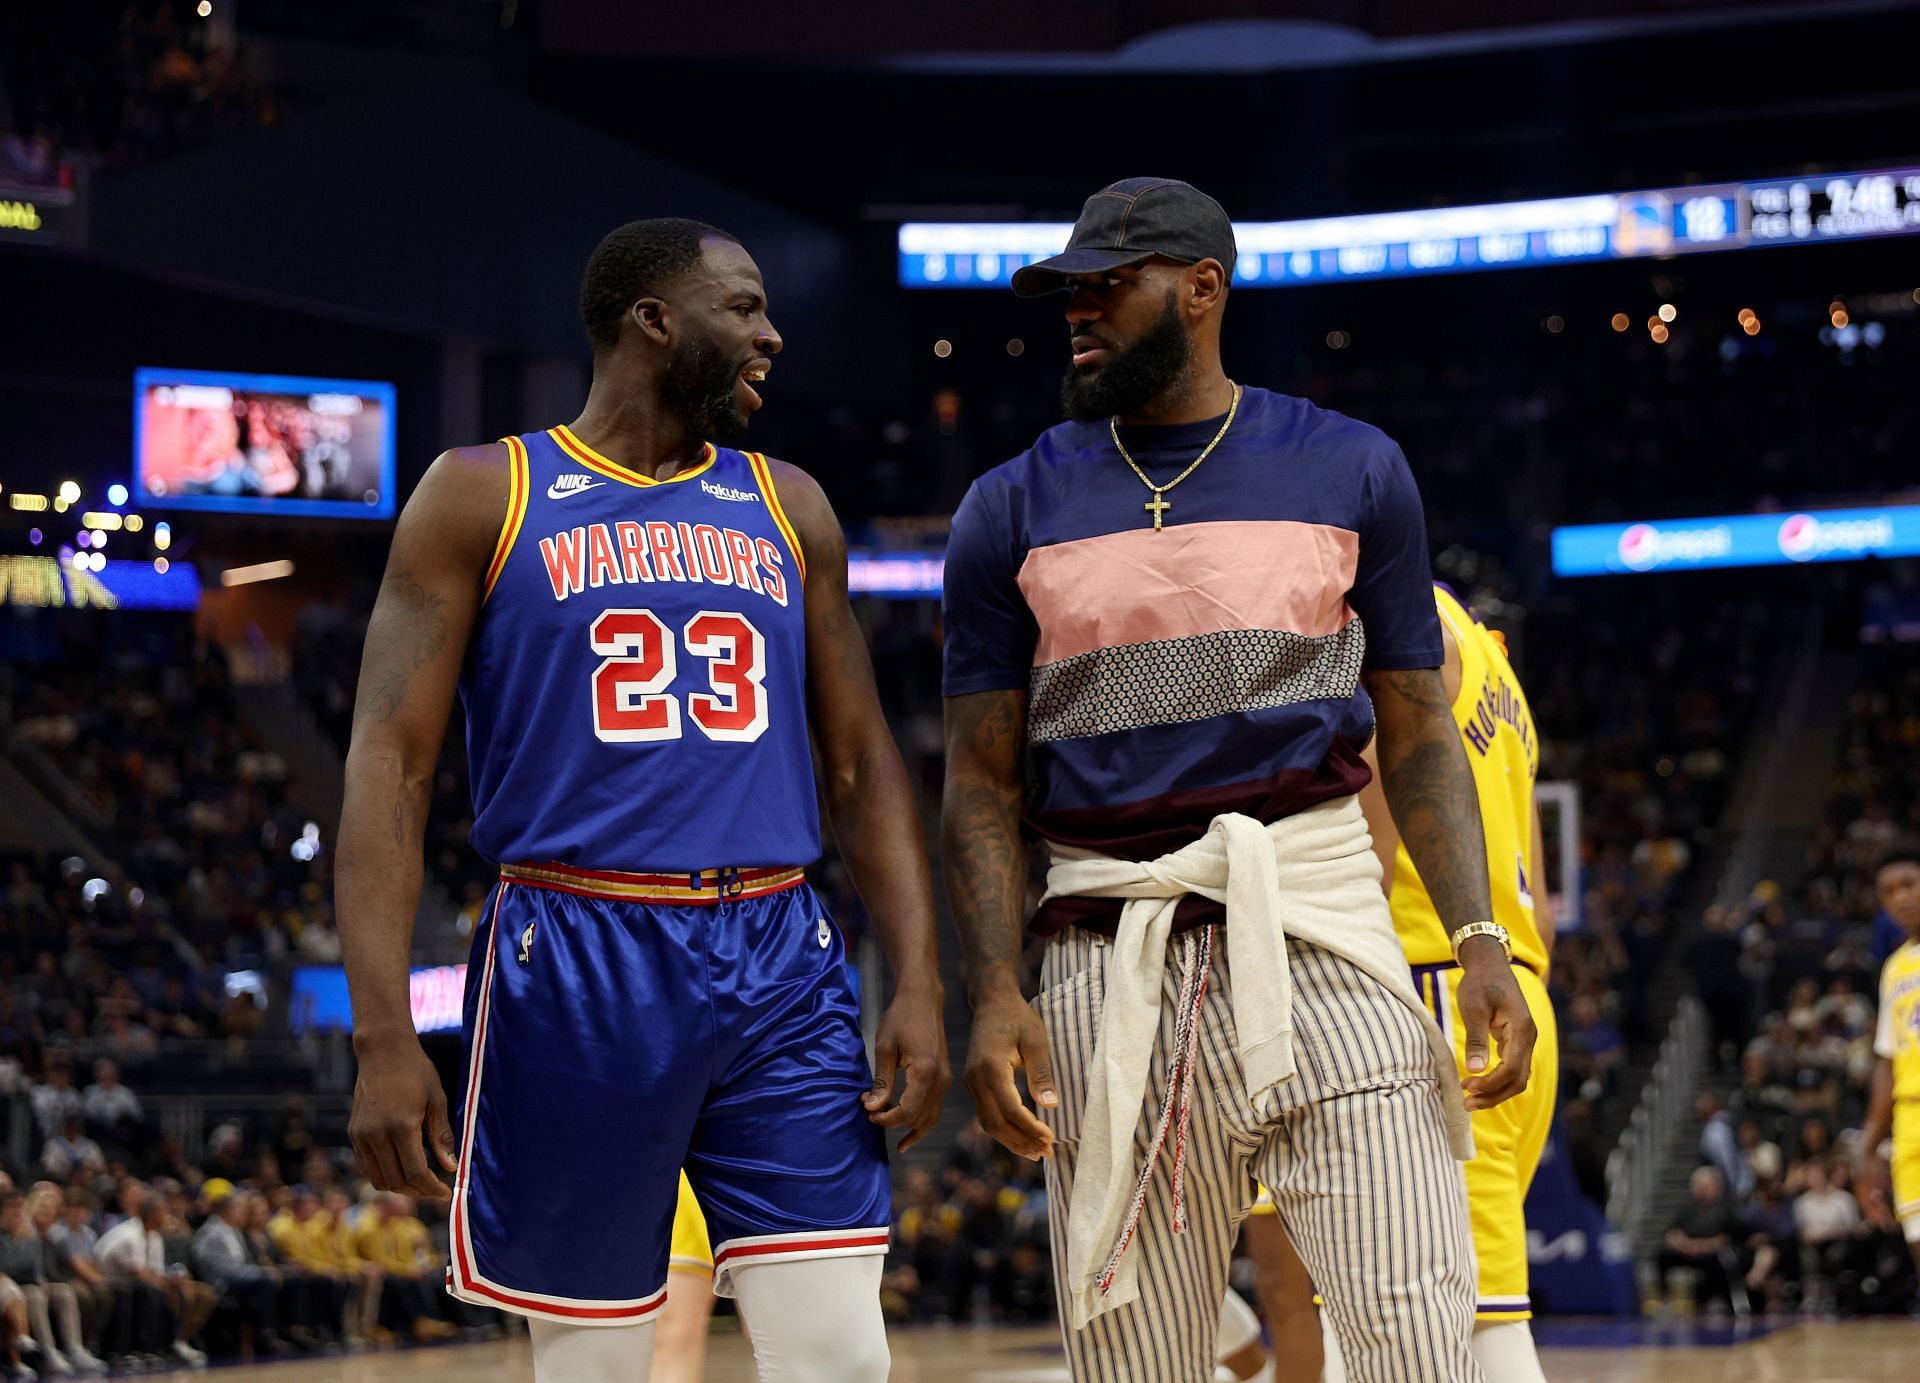 Draymond Green #23 of the Golden State Warriors talks with injured LeBron James #6 of the Los Angeles Lakers